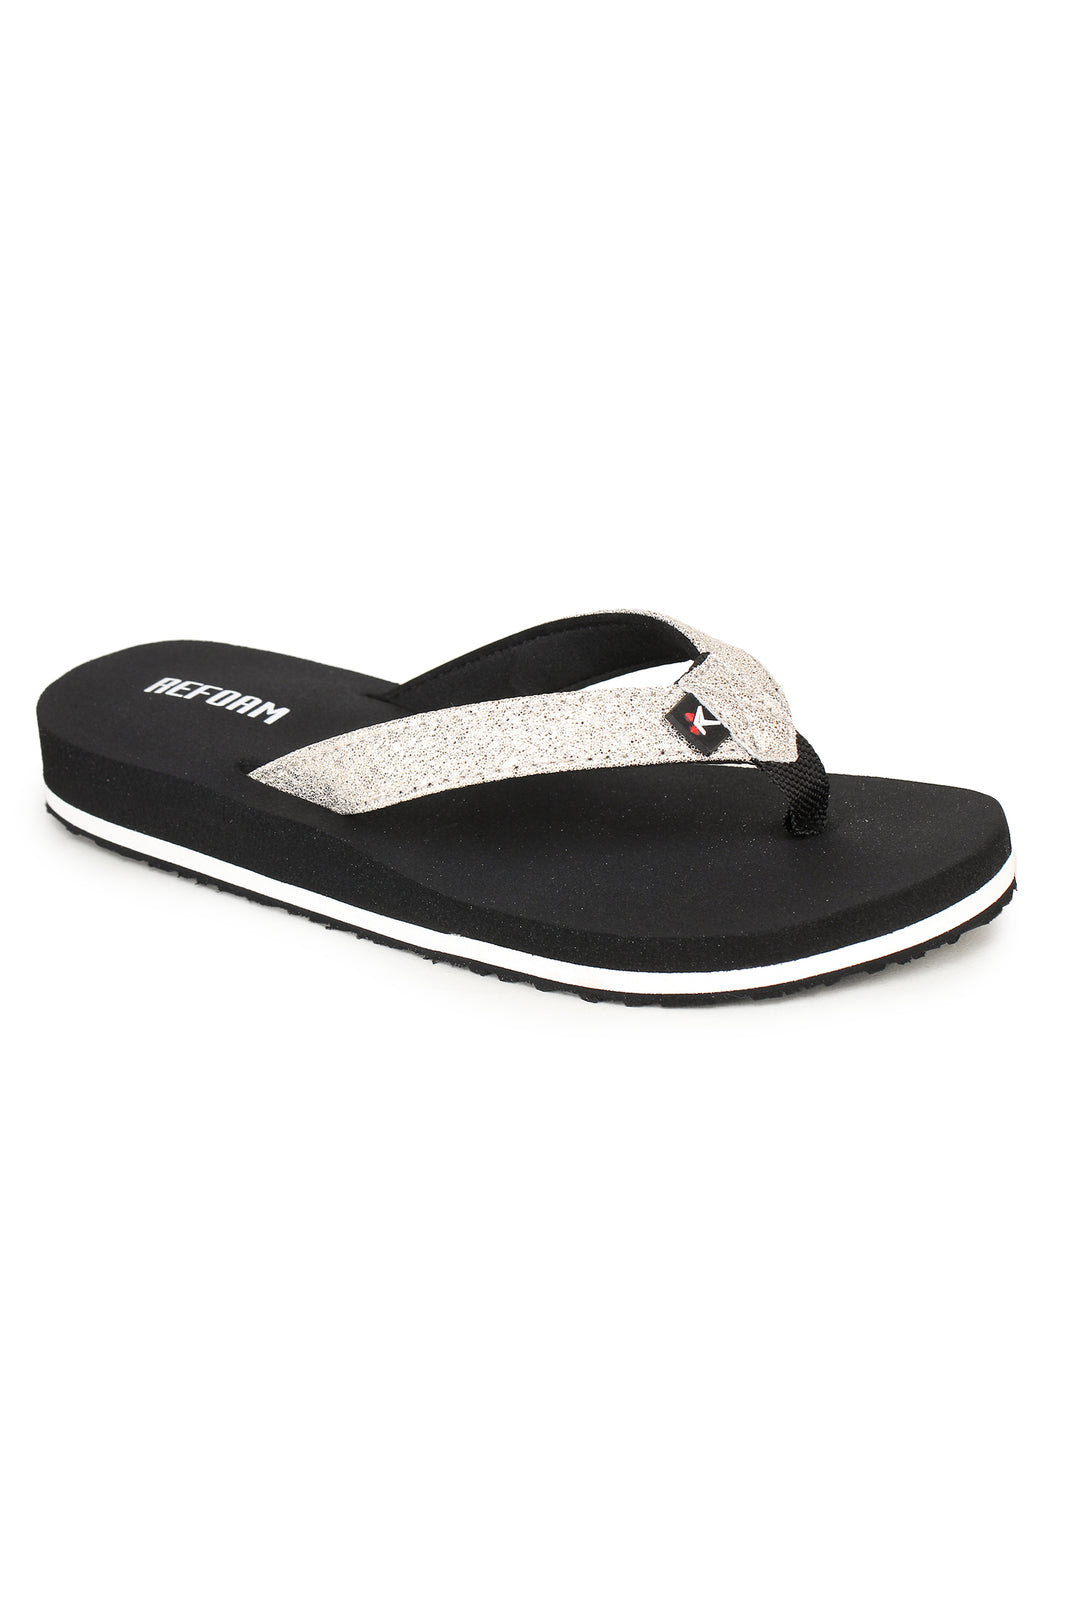 Black Solid Rubber Slip On Casual Slippers For Women